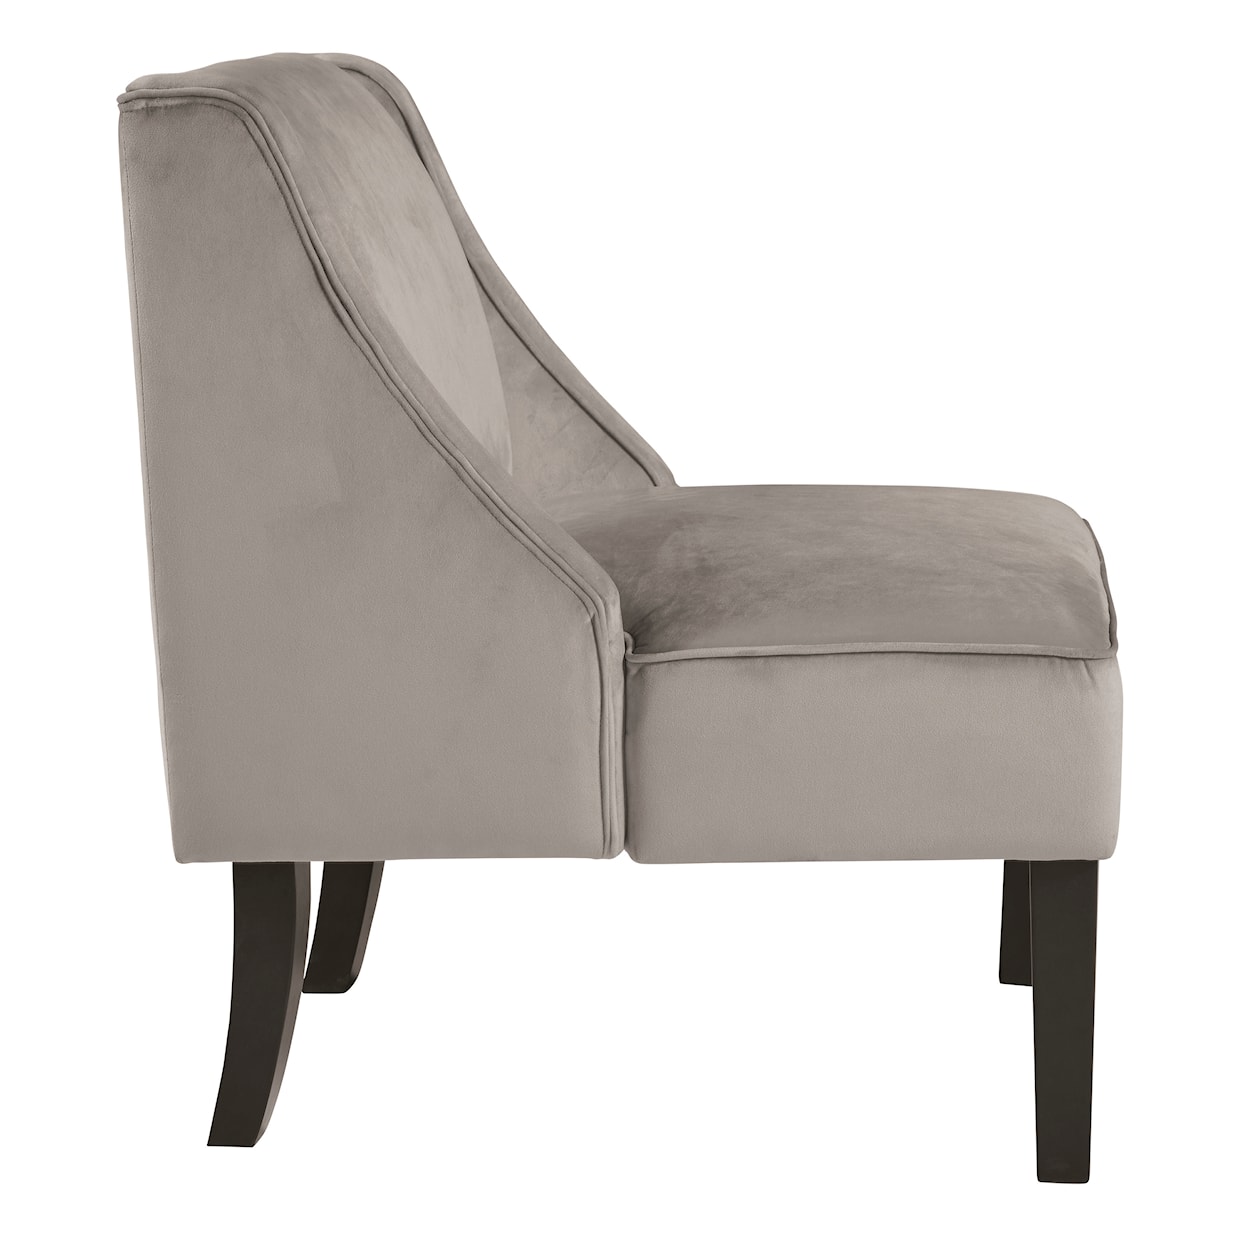 Michael Alan Select Janesley Accent Chair